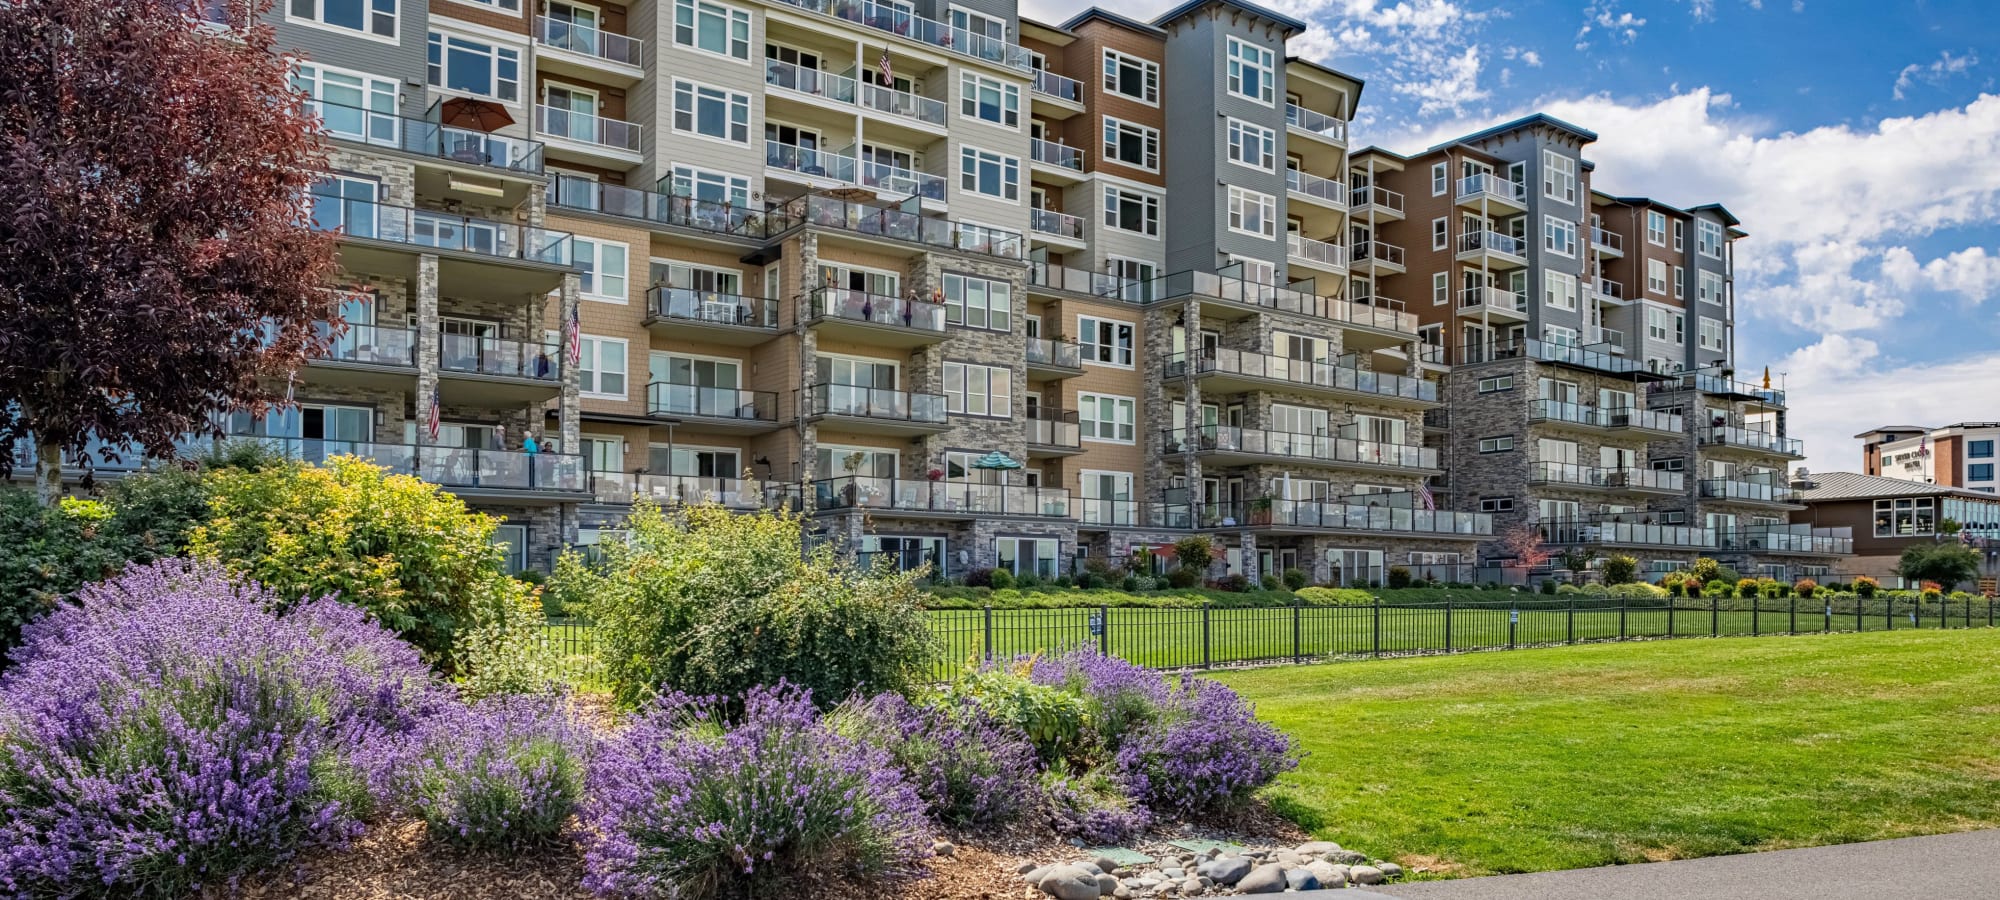 Amenities at Copperline at Point Ruston in Tacoma, Washington